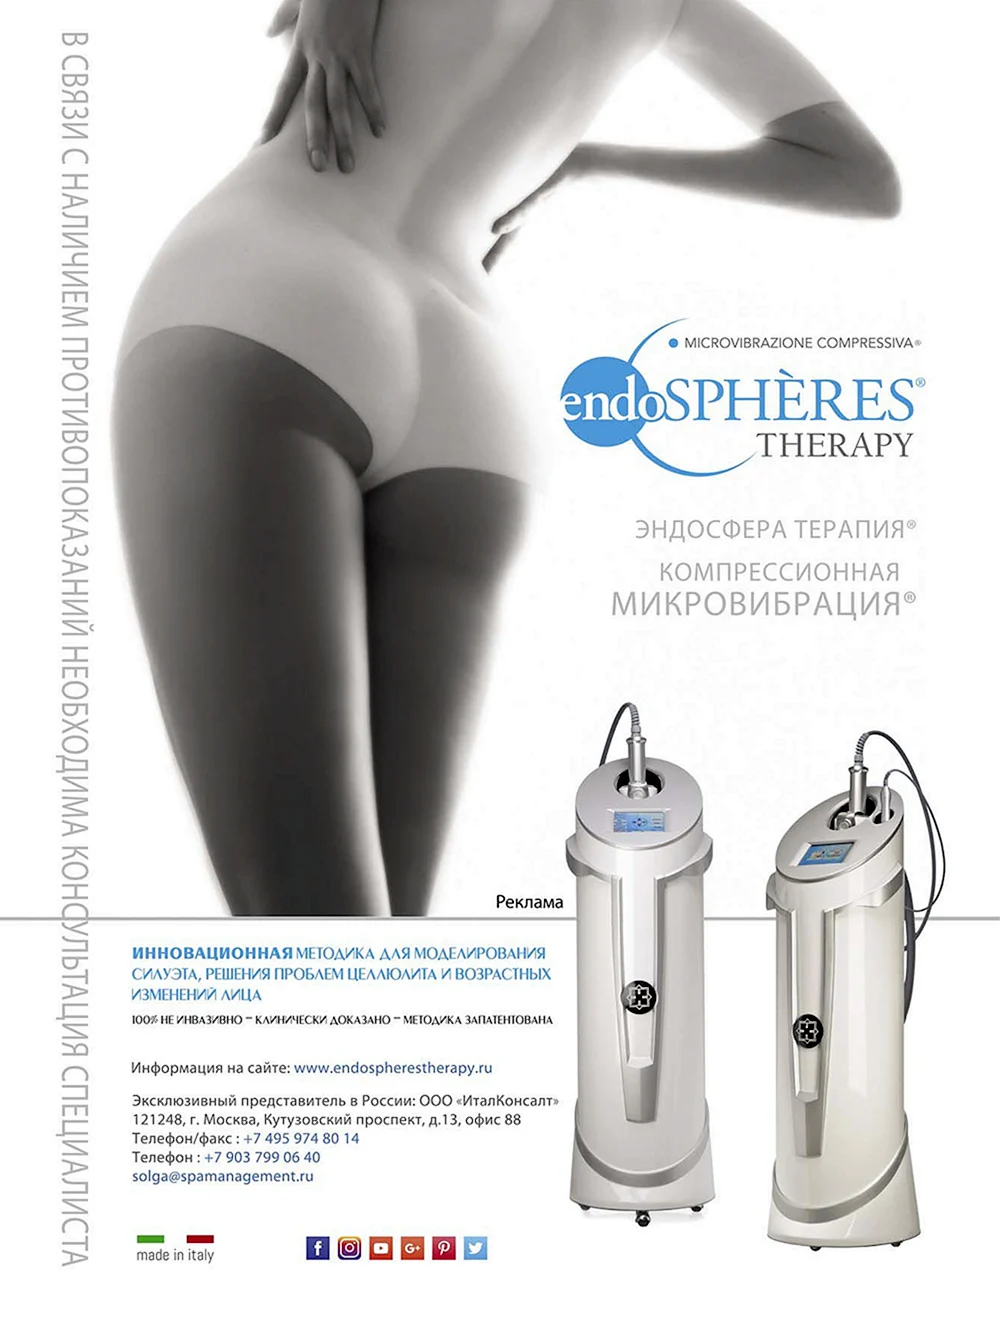 Endosphere Therapy